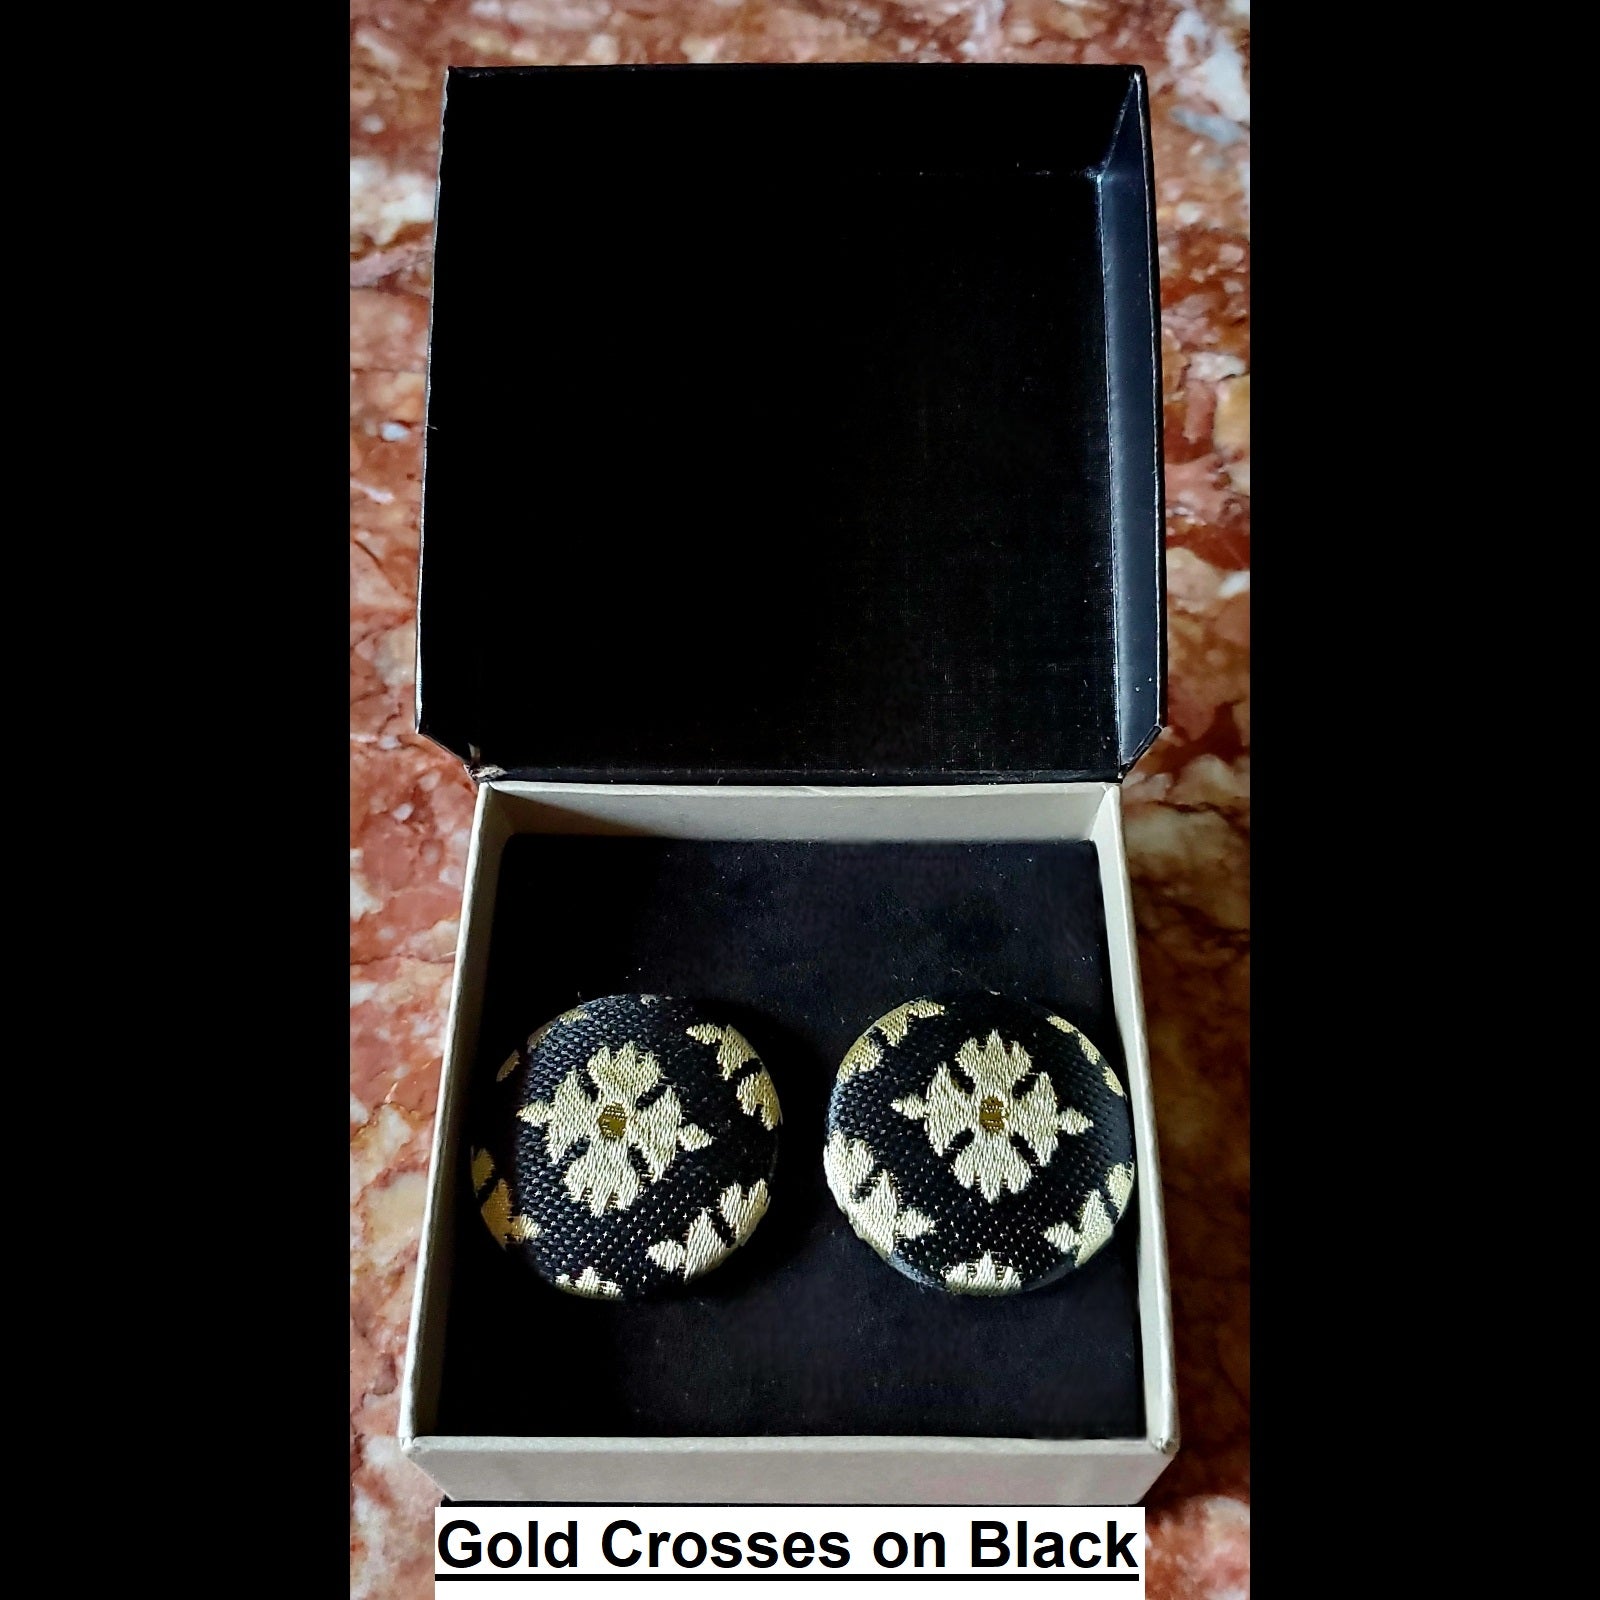 Gold crosses on black print button earrings in jewelry box